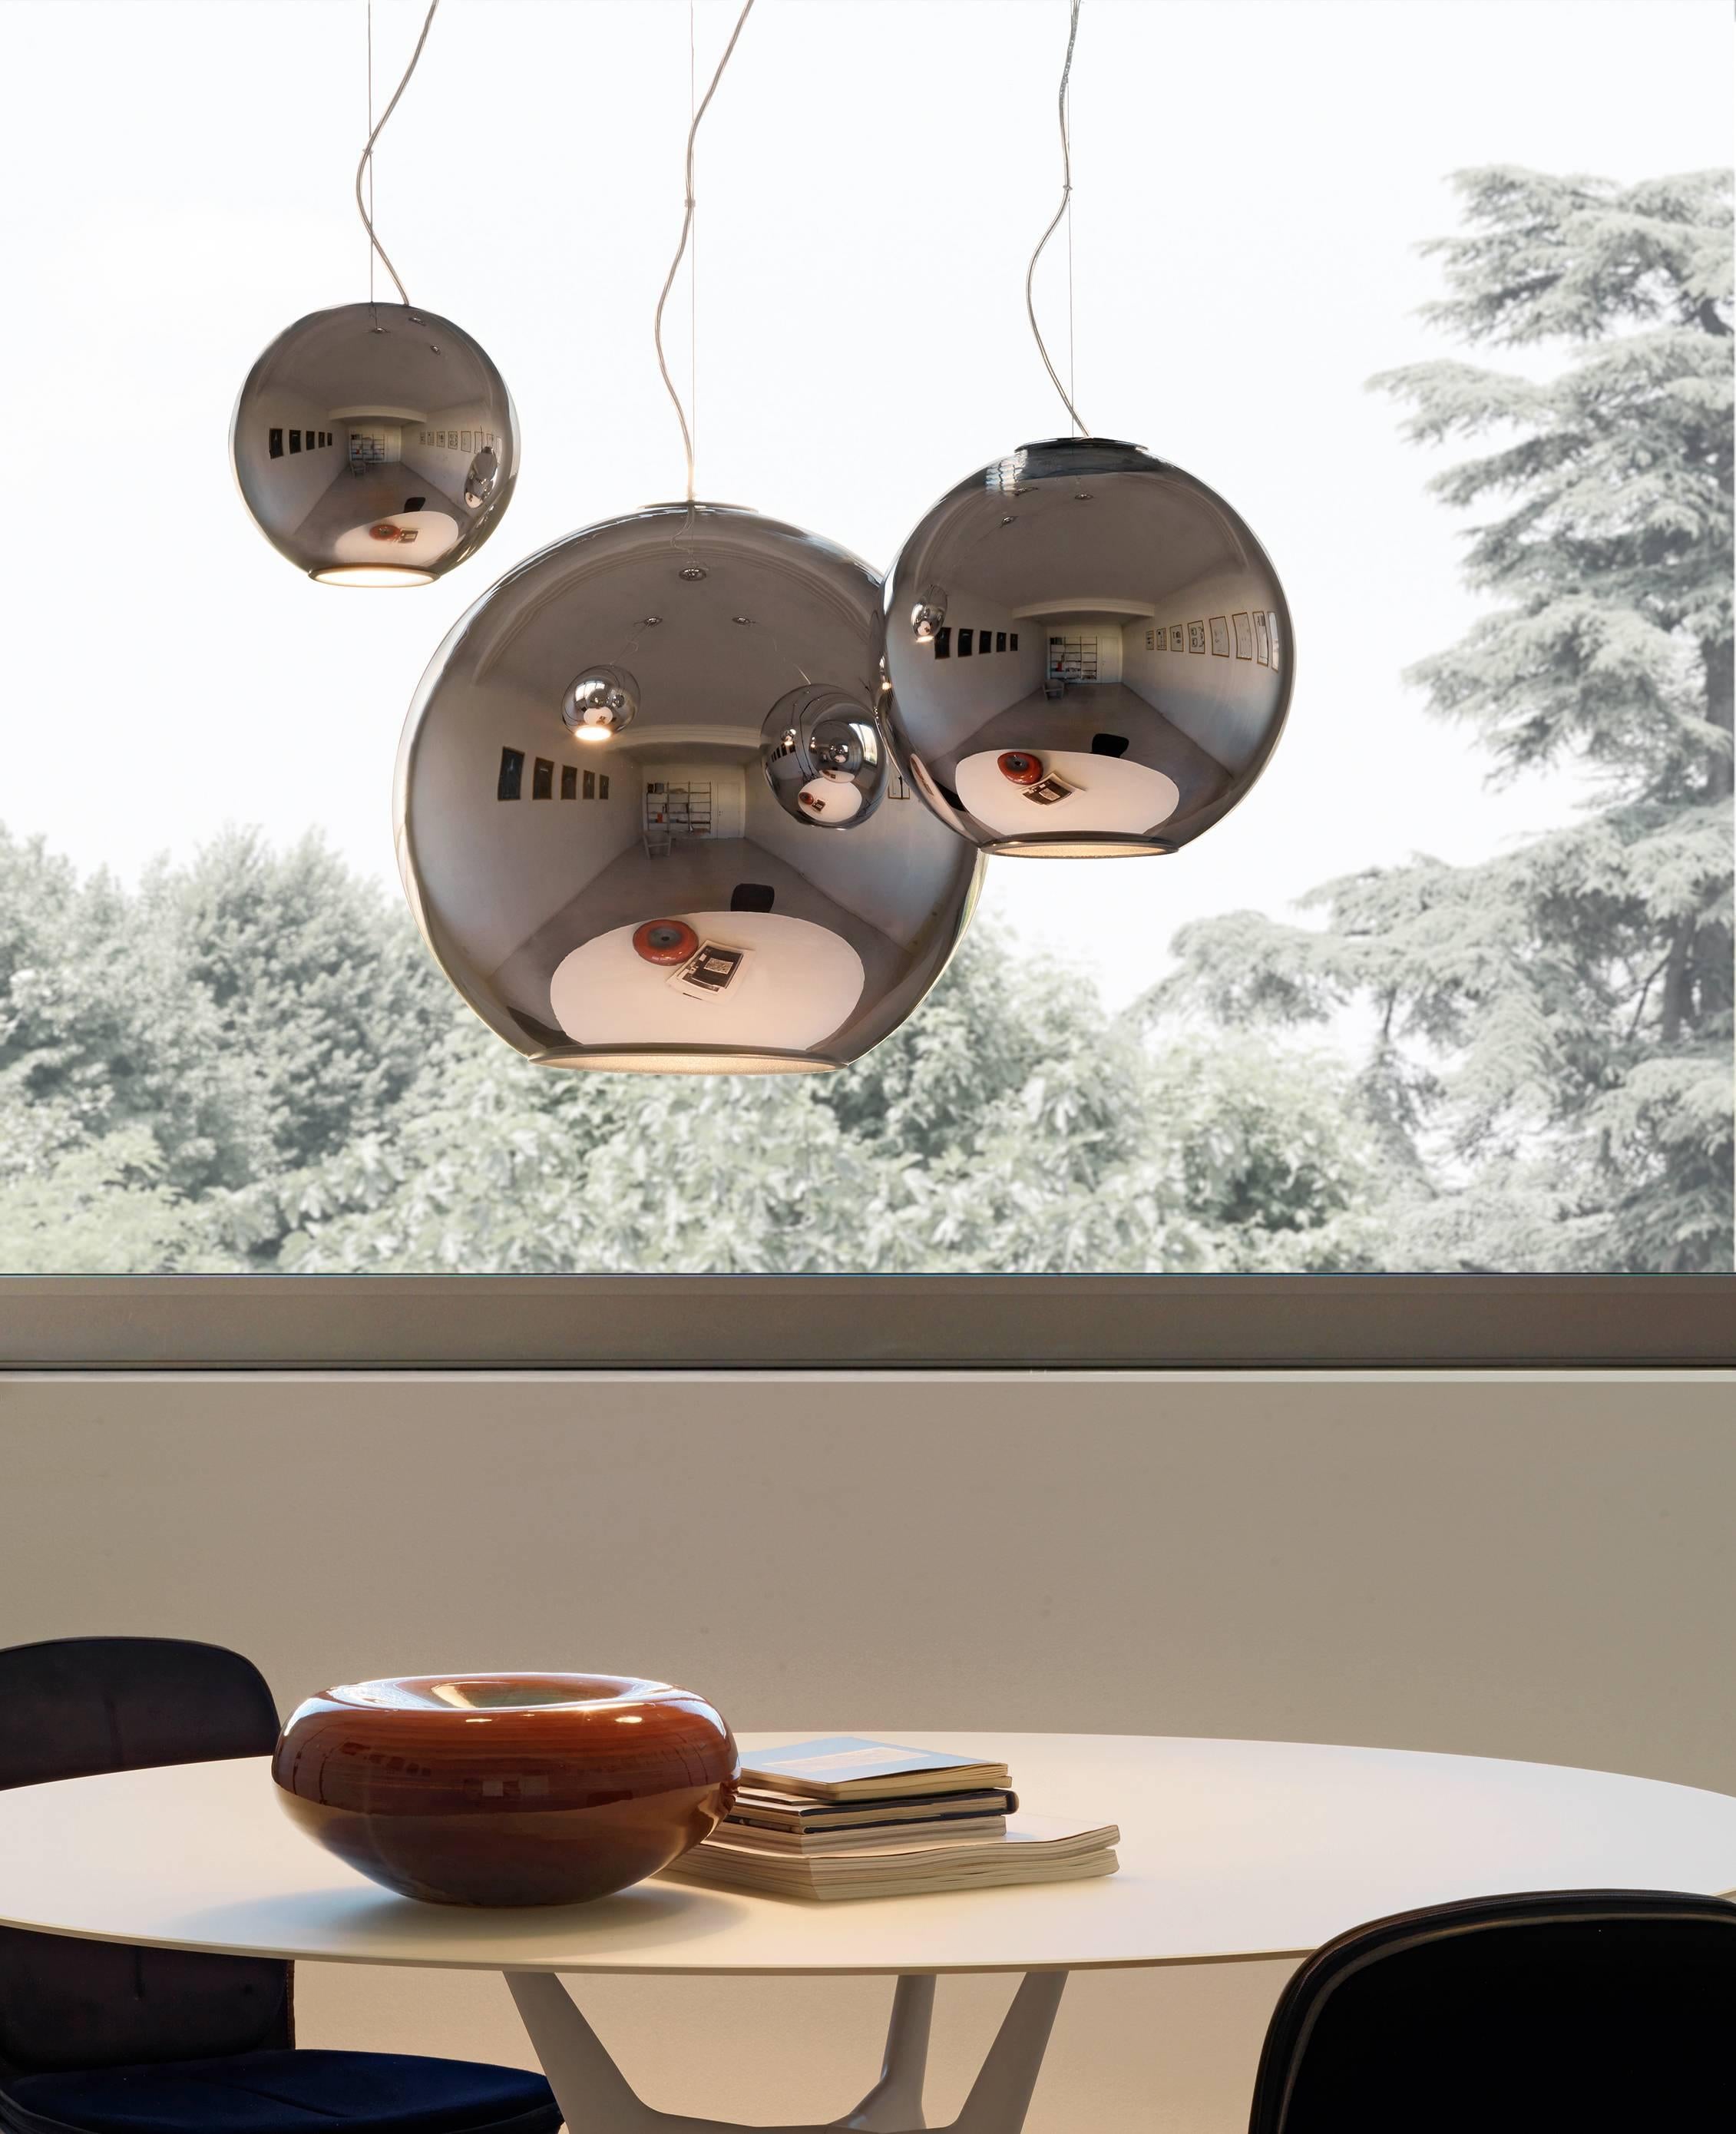 Designed by Roberto Menghi in 1968 and manufactured by Fontana Arte, the Globo di Luce Suspension Lamp is made from blown glass, chrome and metallic copper finishes which enhances the spherical lampshades of this family, available in two different